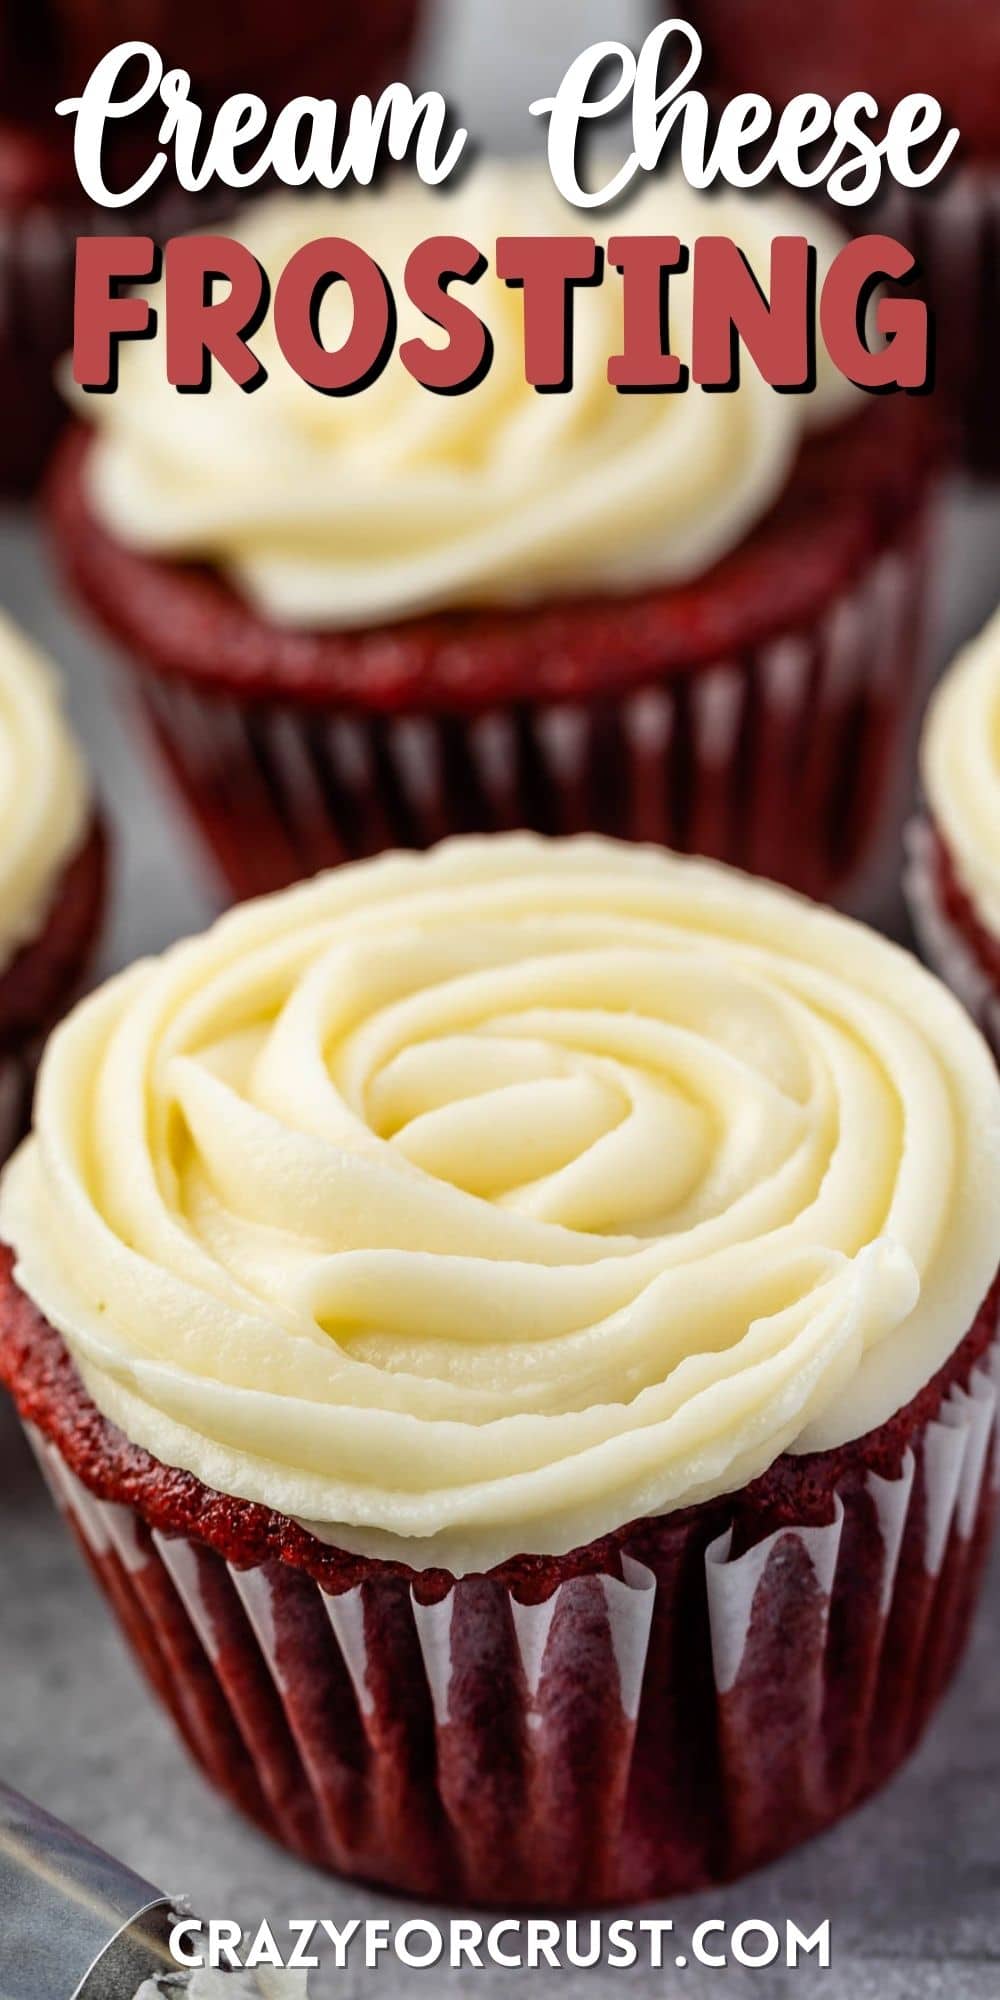 Red velvet cupcakes with cream cheese frosting and recipe title on top of image